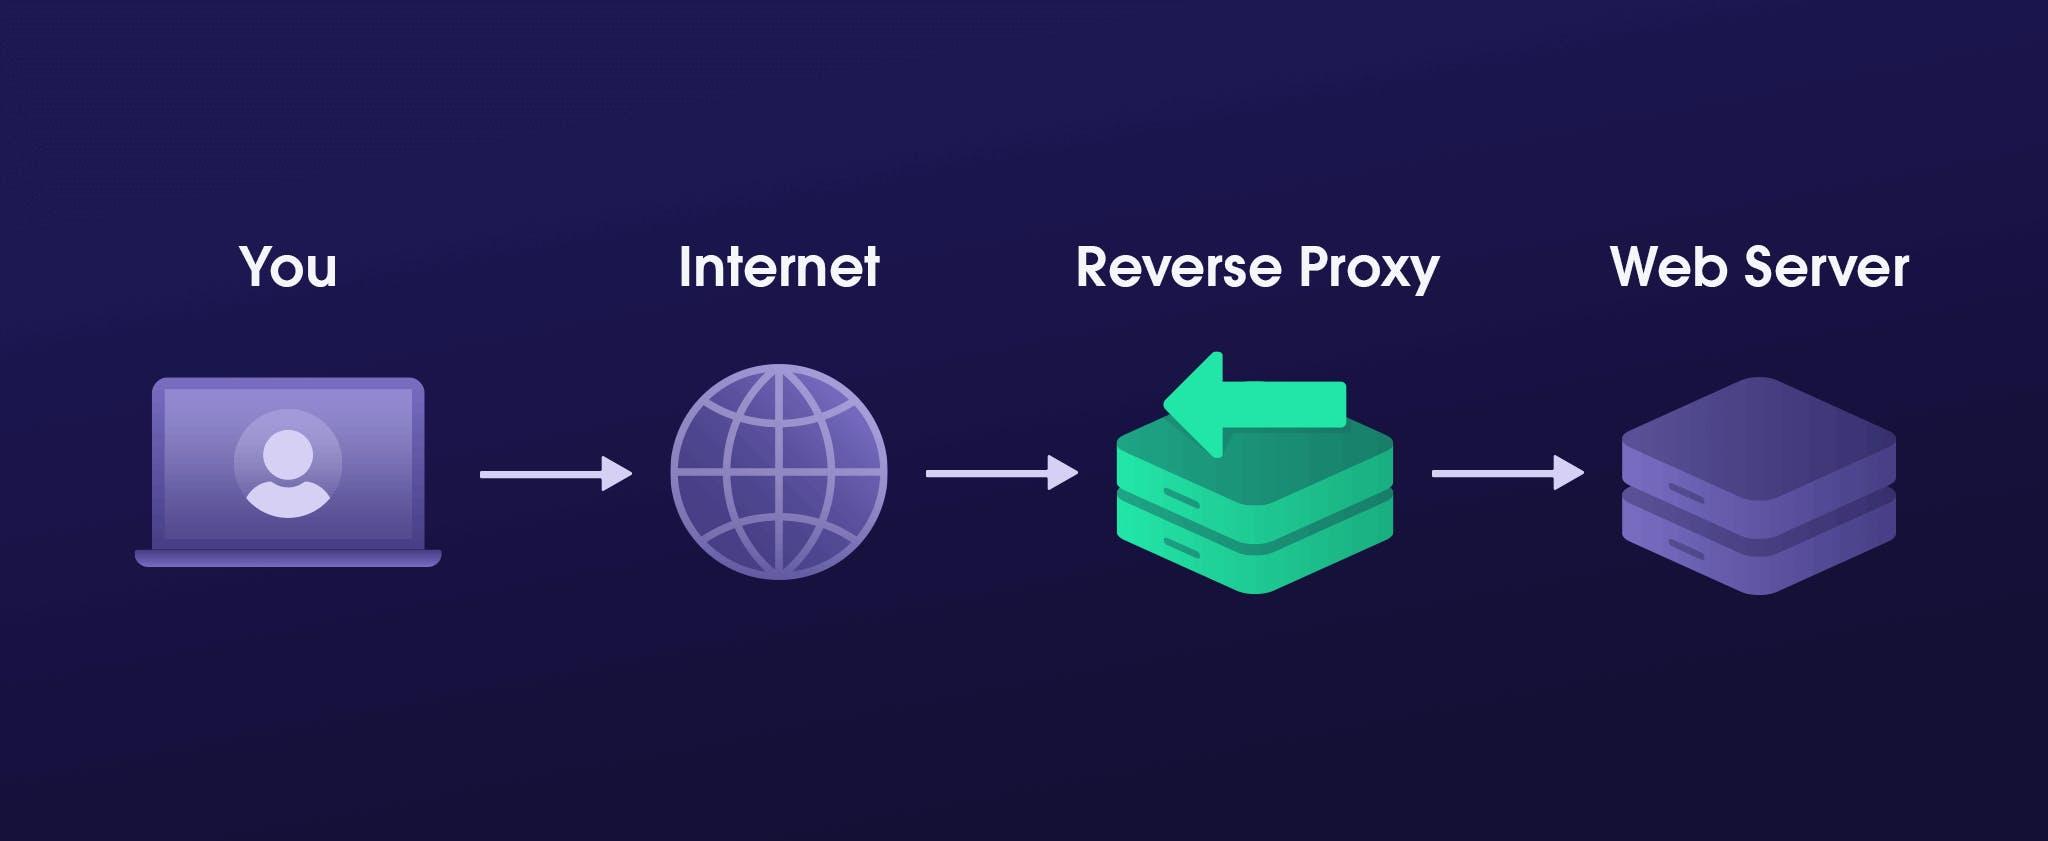 How do reverse proxies operate